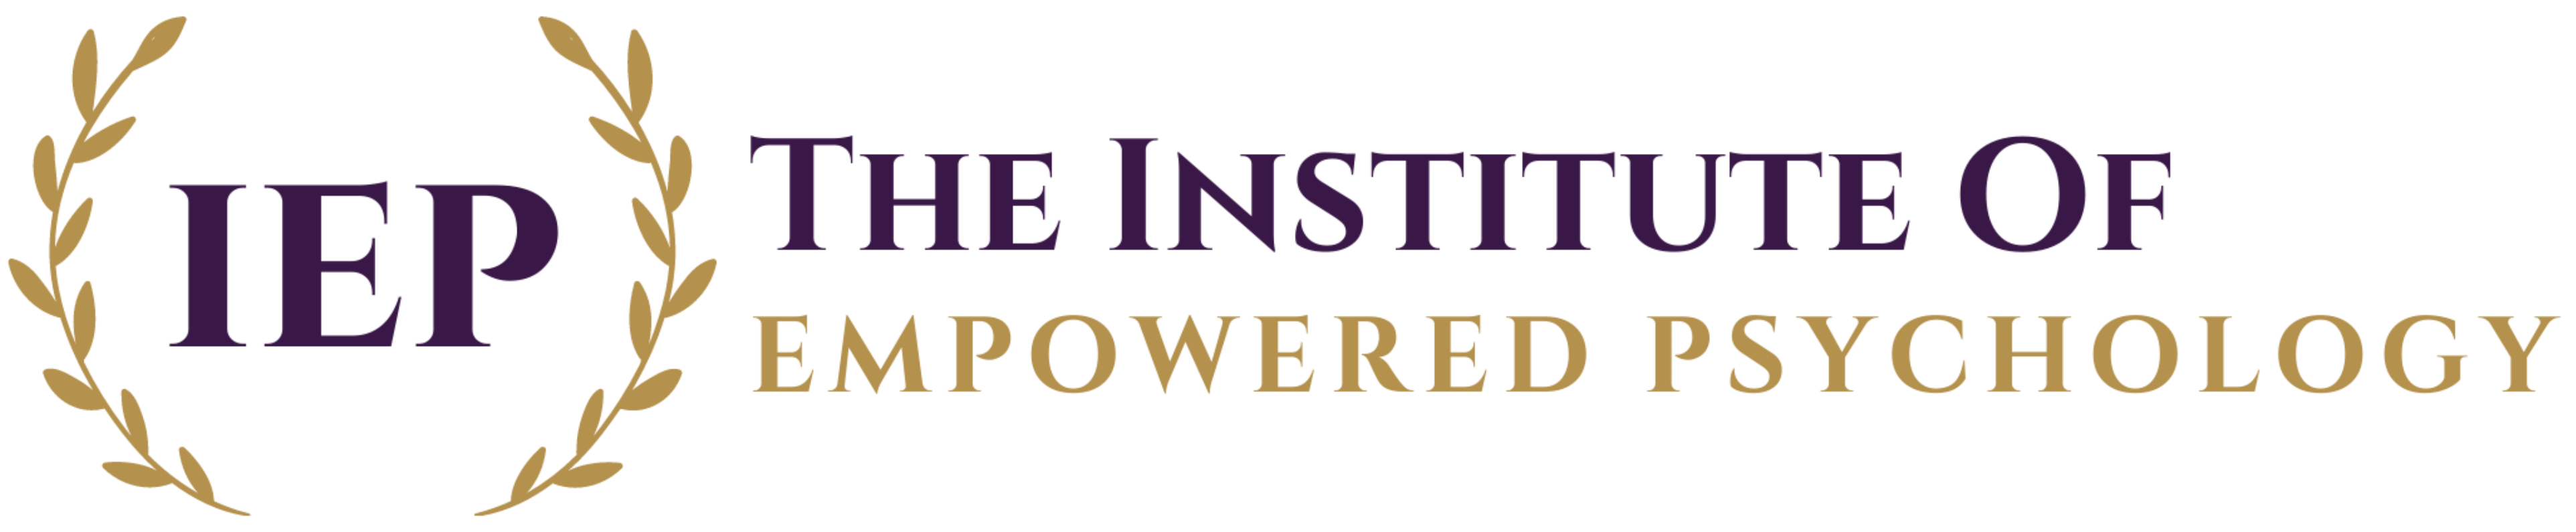 The Institute of Empowered Psychology